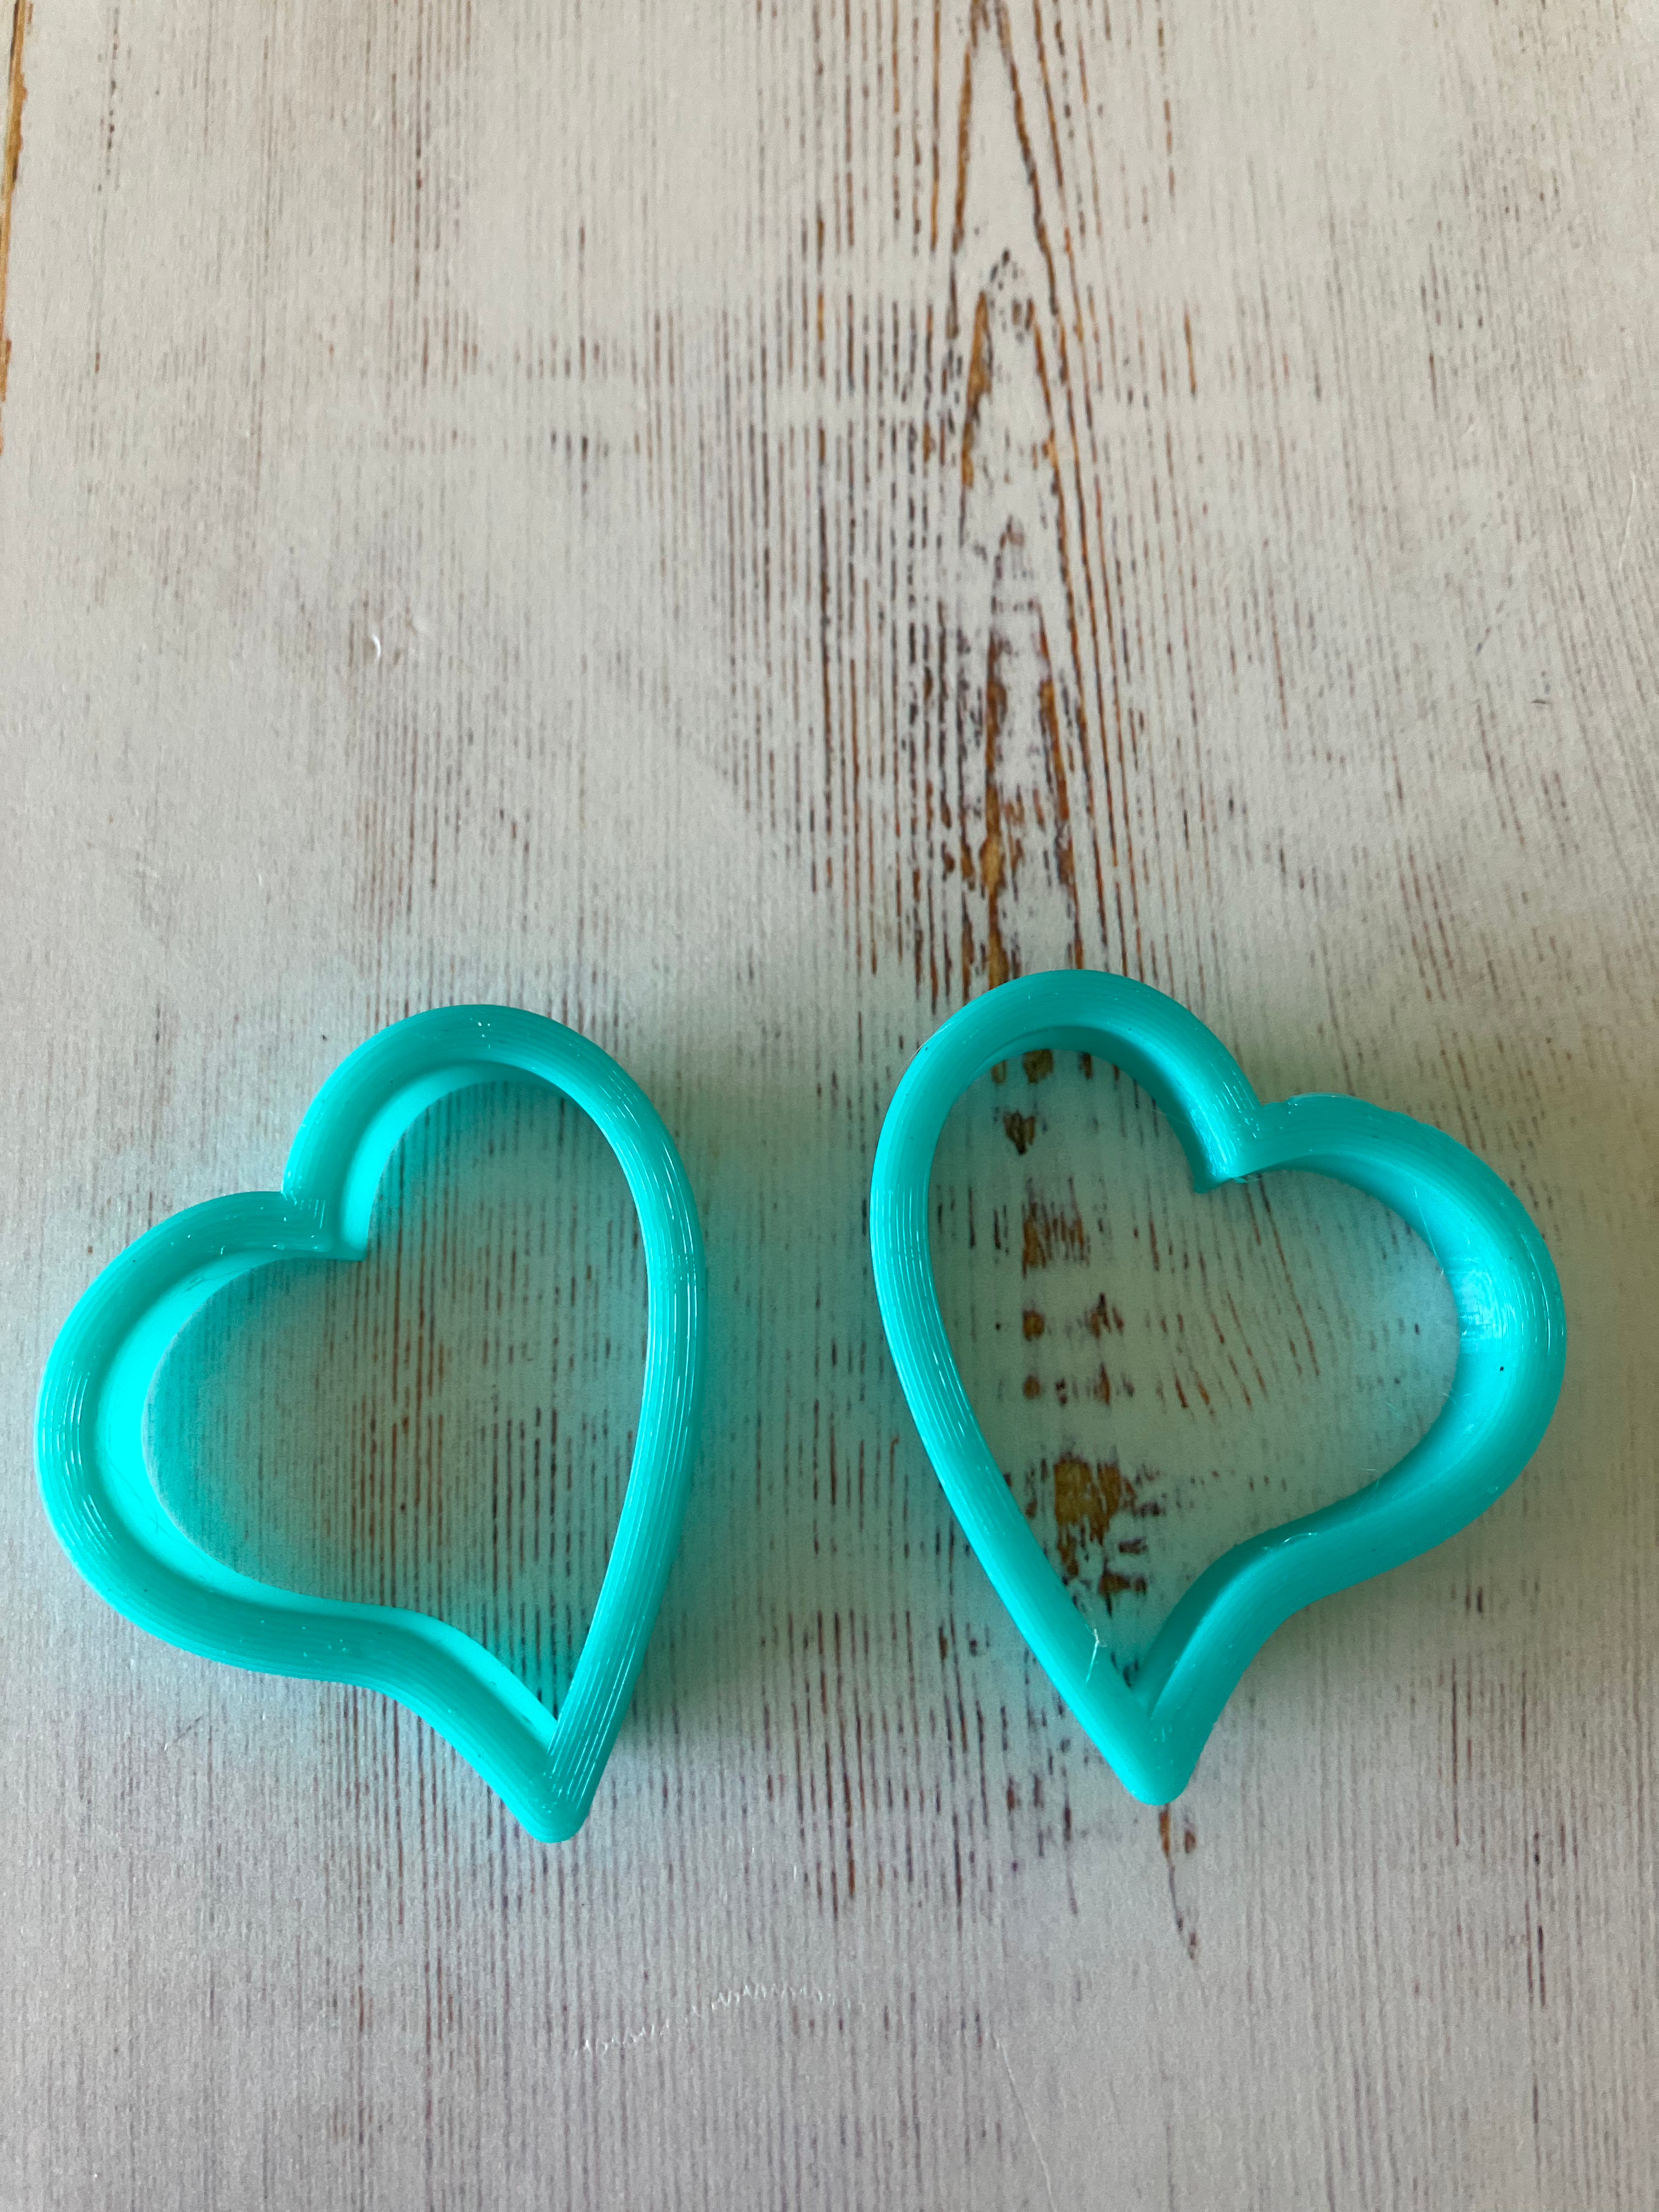 3D Gizmo's - Curved Hearts 40 MM (2 Cutters)